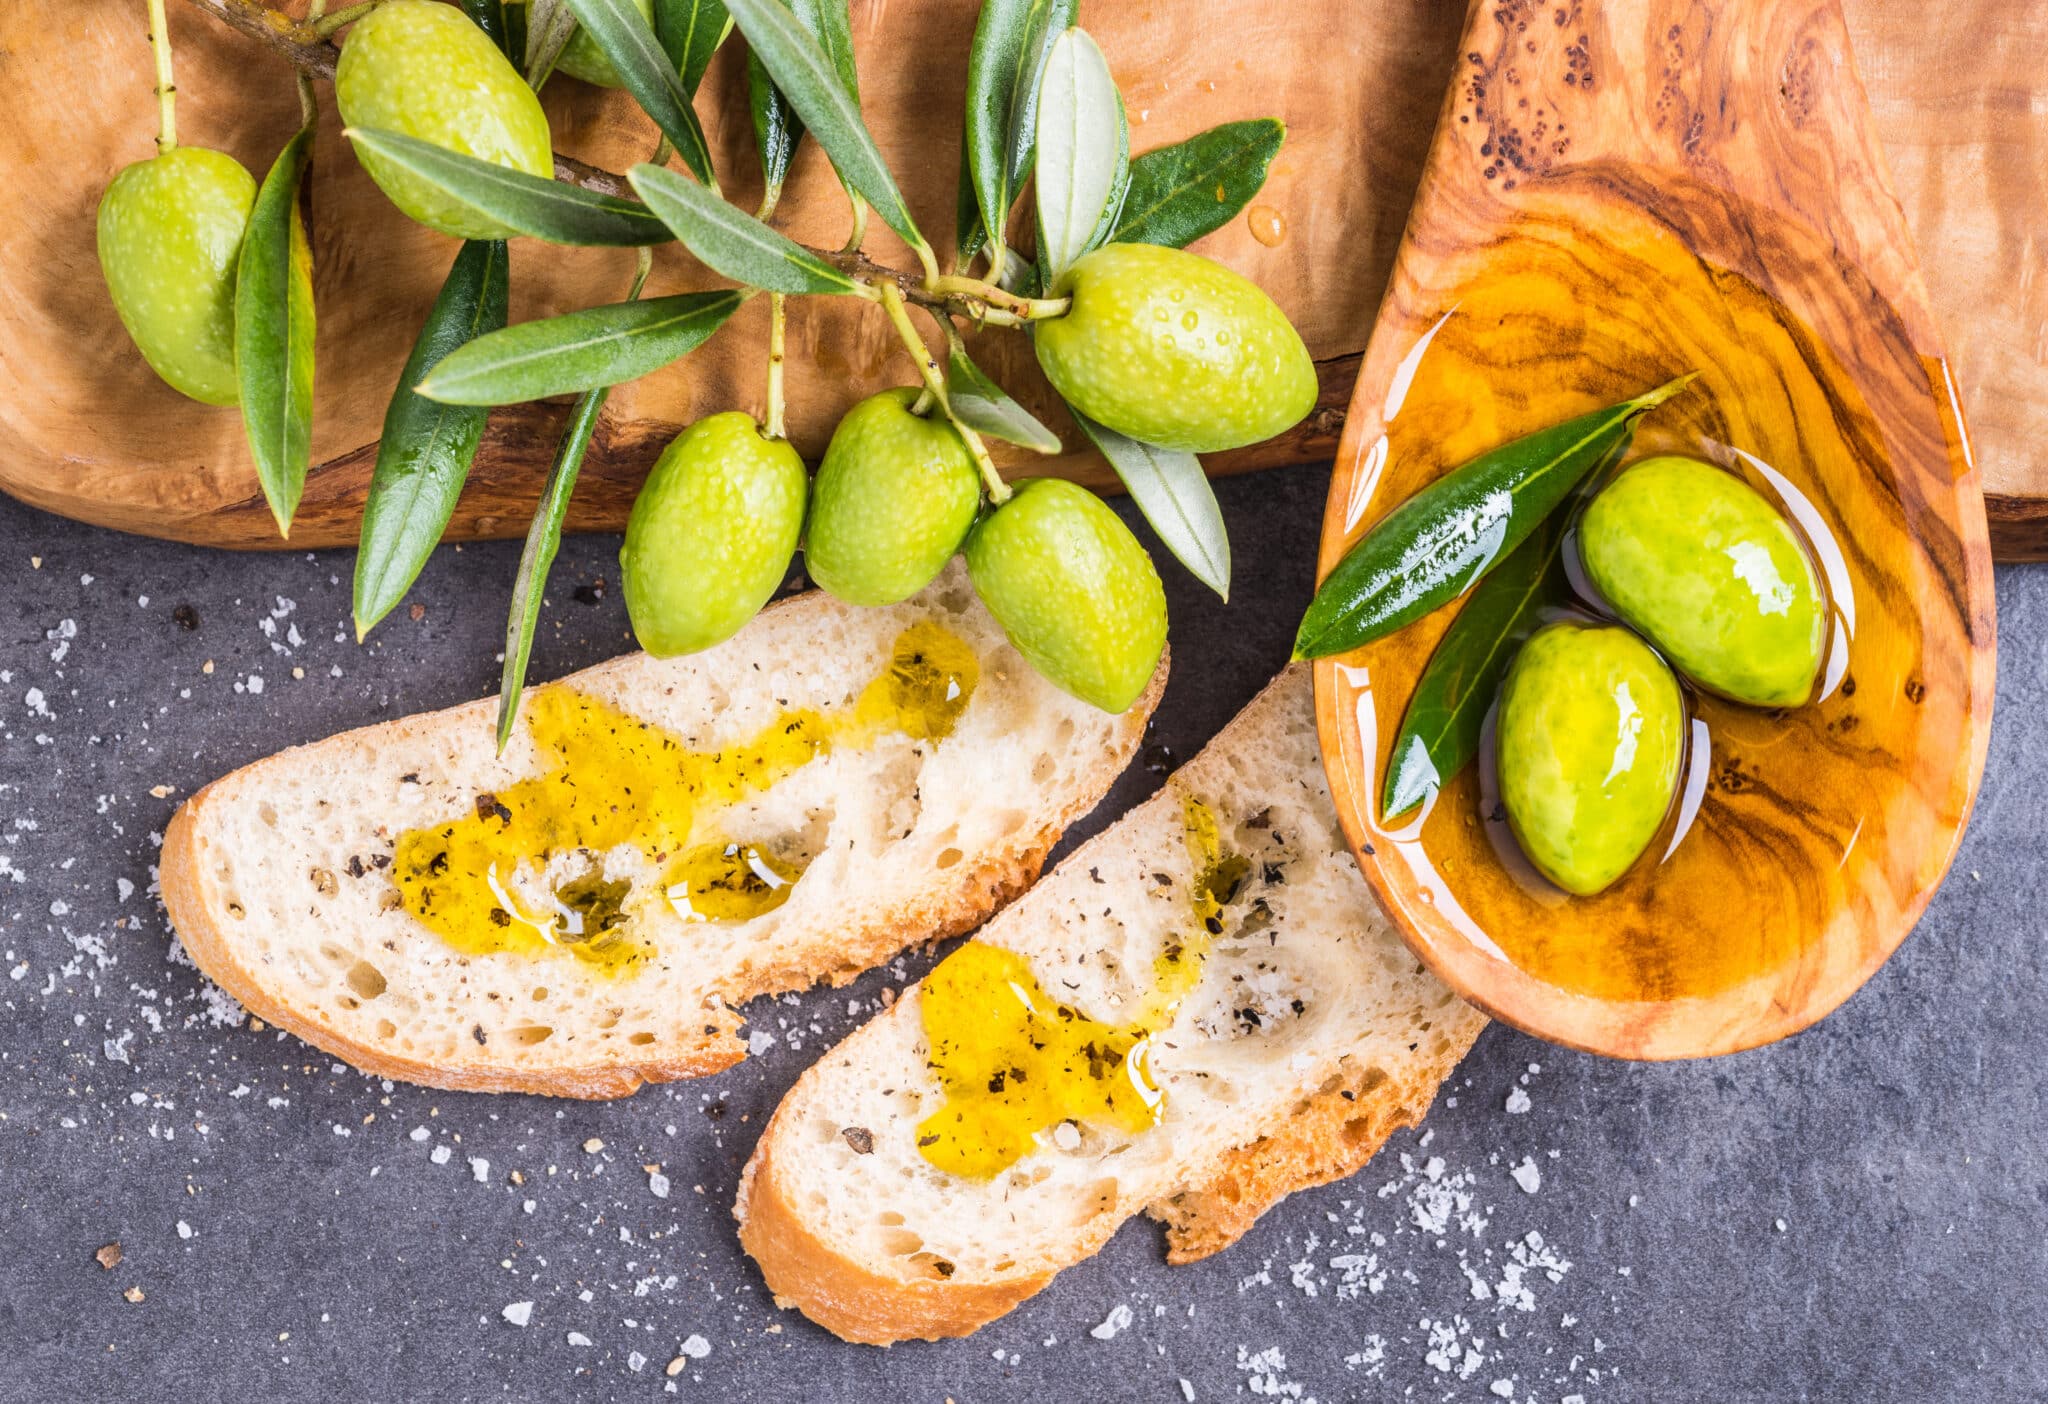 Learn how to make the most of the Spanish olive oil uses